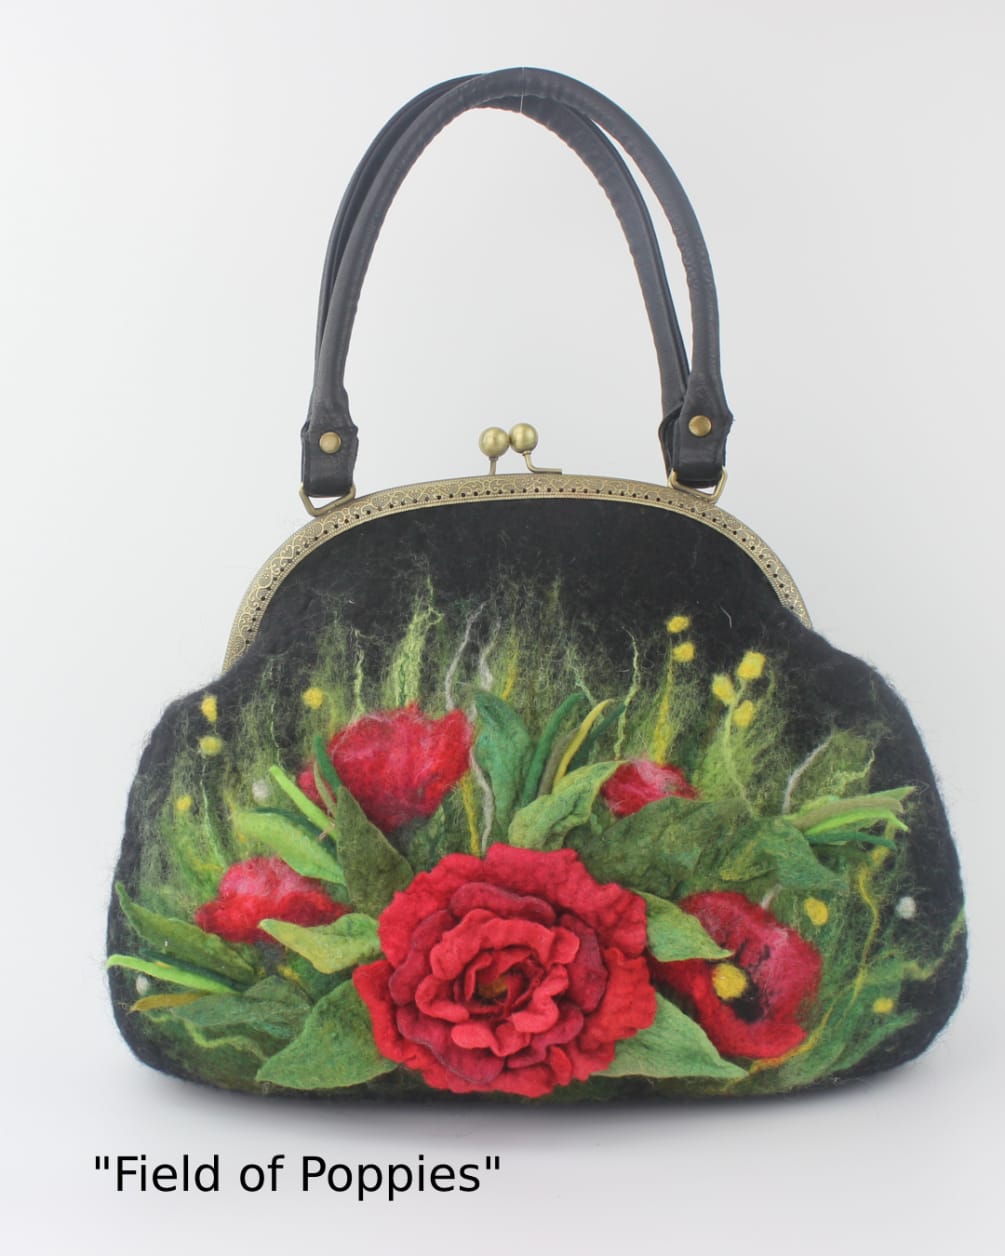 This wearable art handbag is crafted from handmade wool felt in a